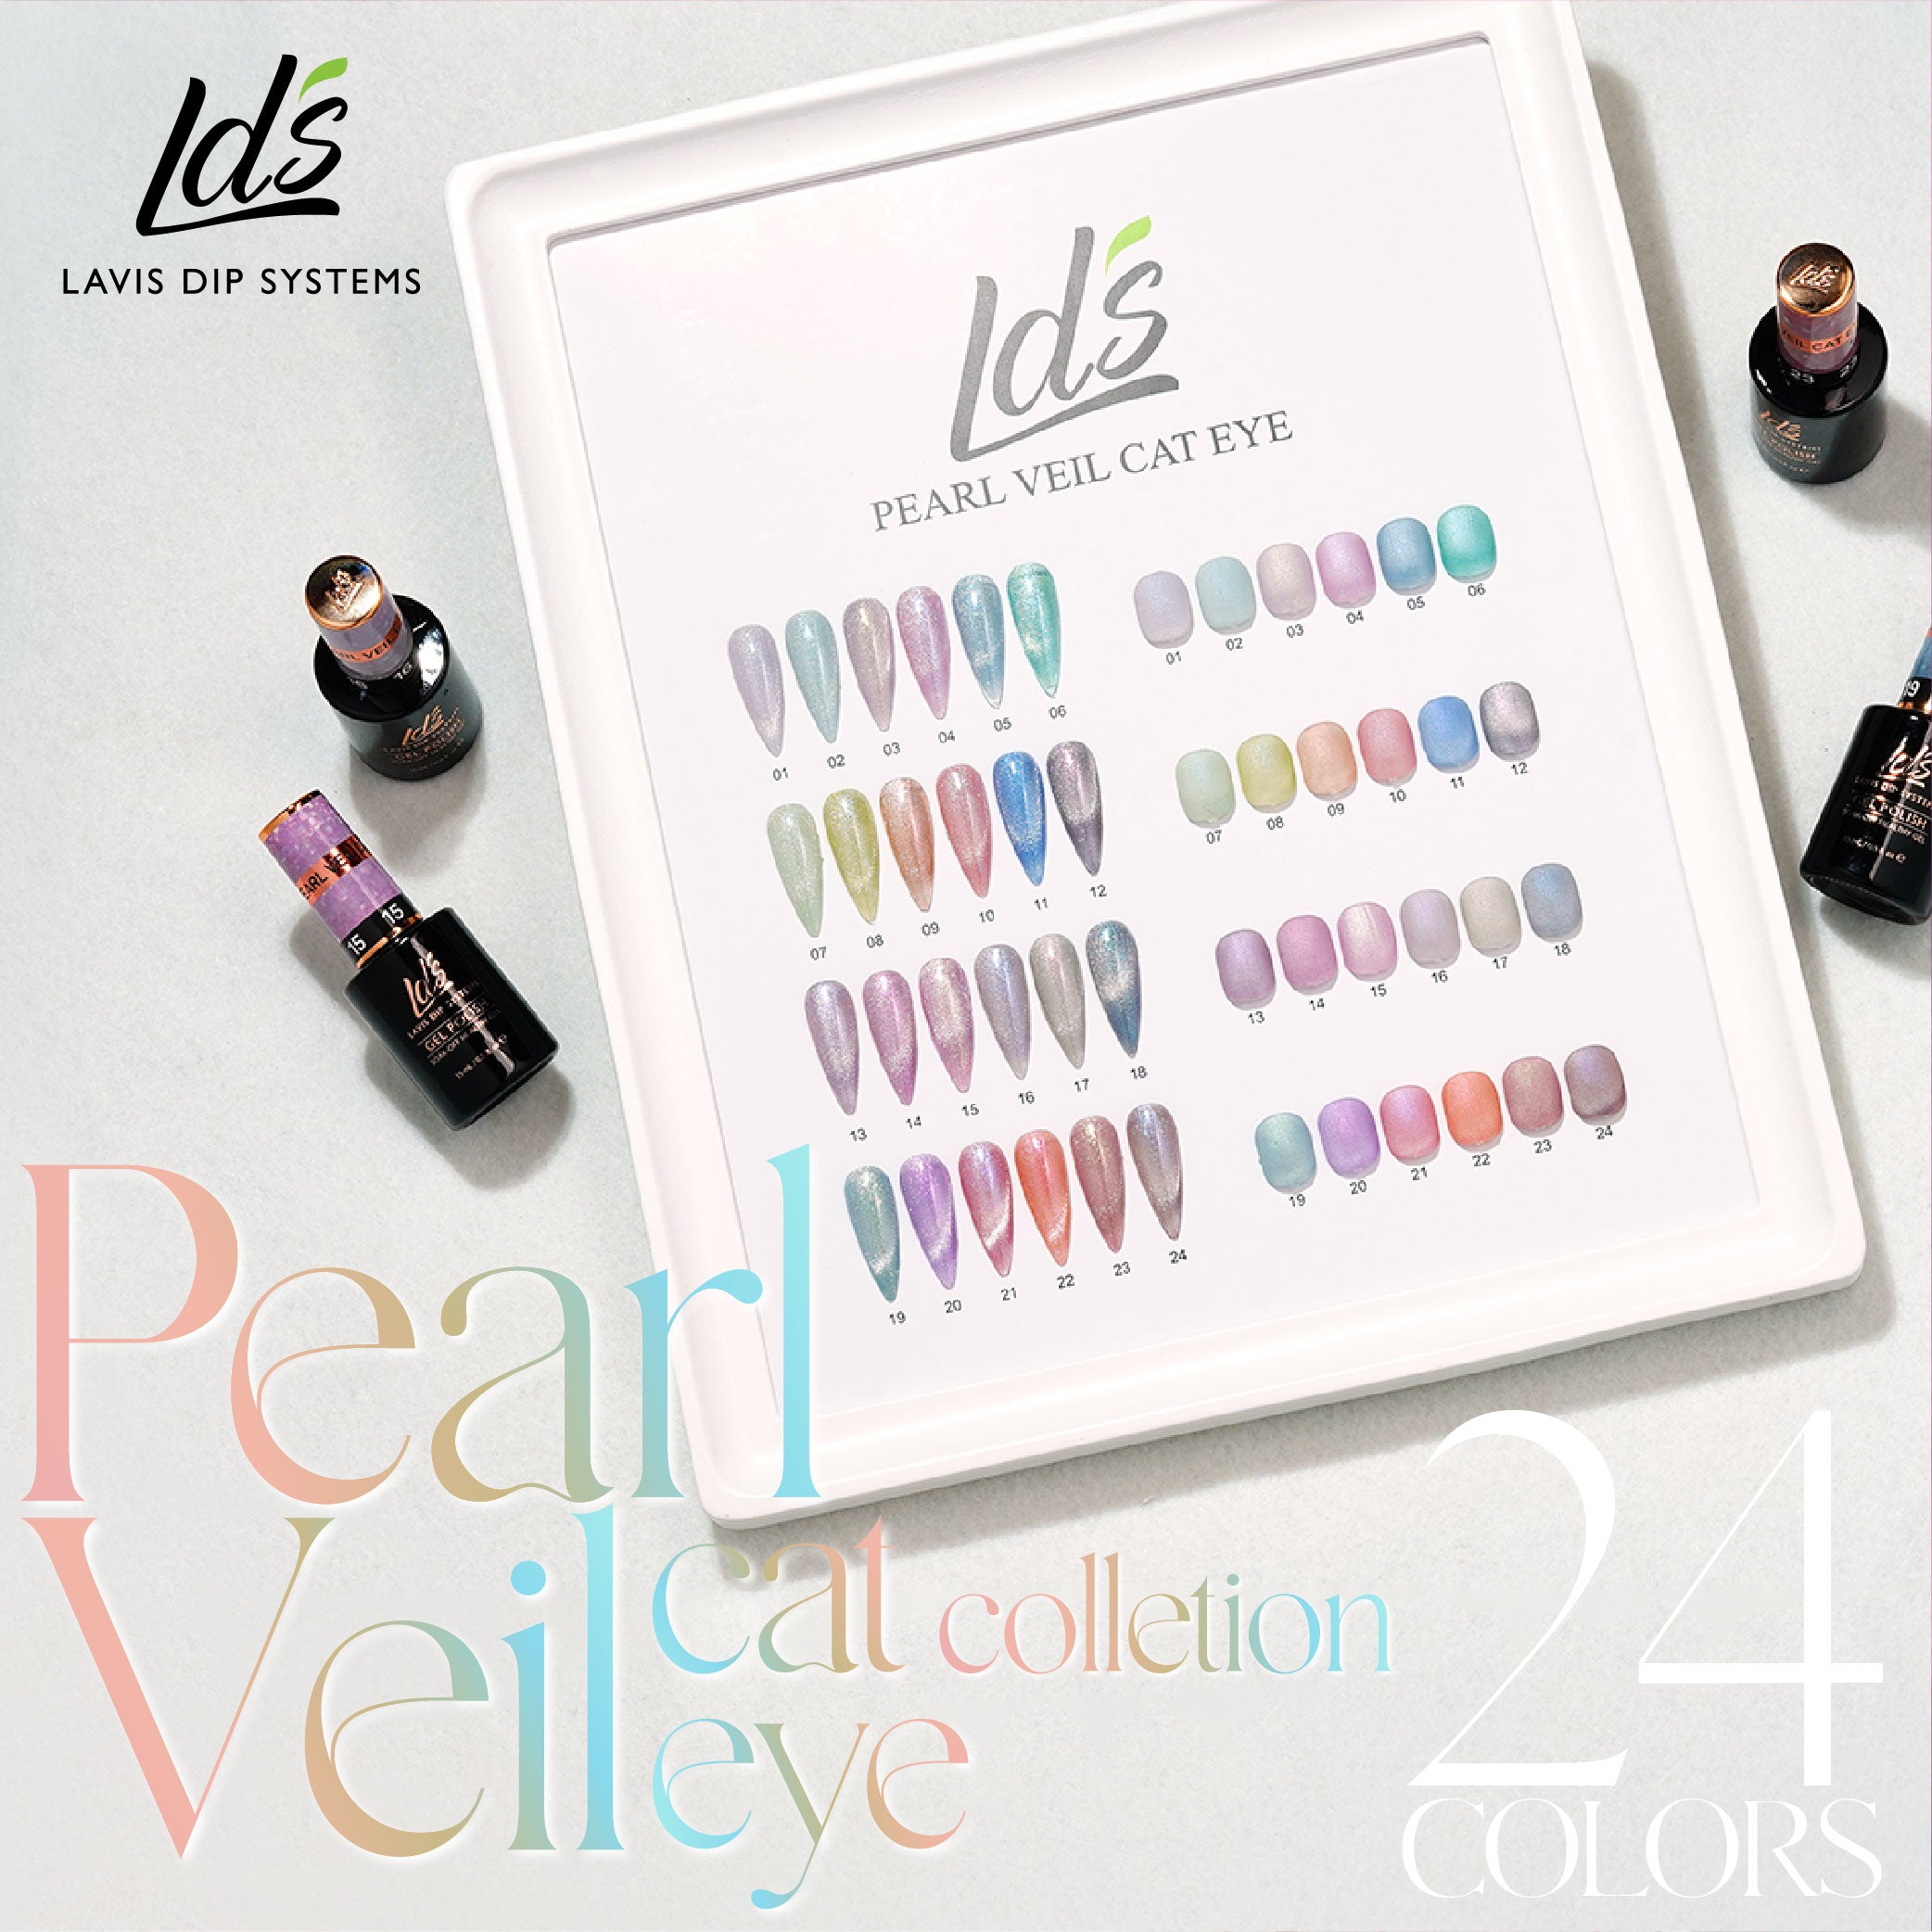 LDS Pearl CE - 14 - Pearl Veil Cat Eye Collection